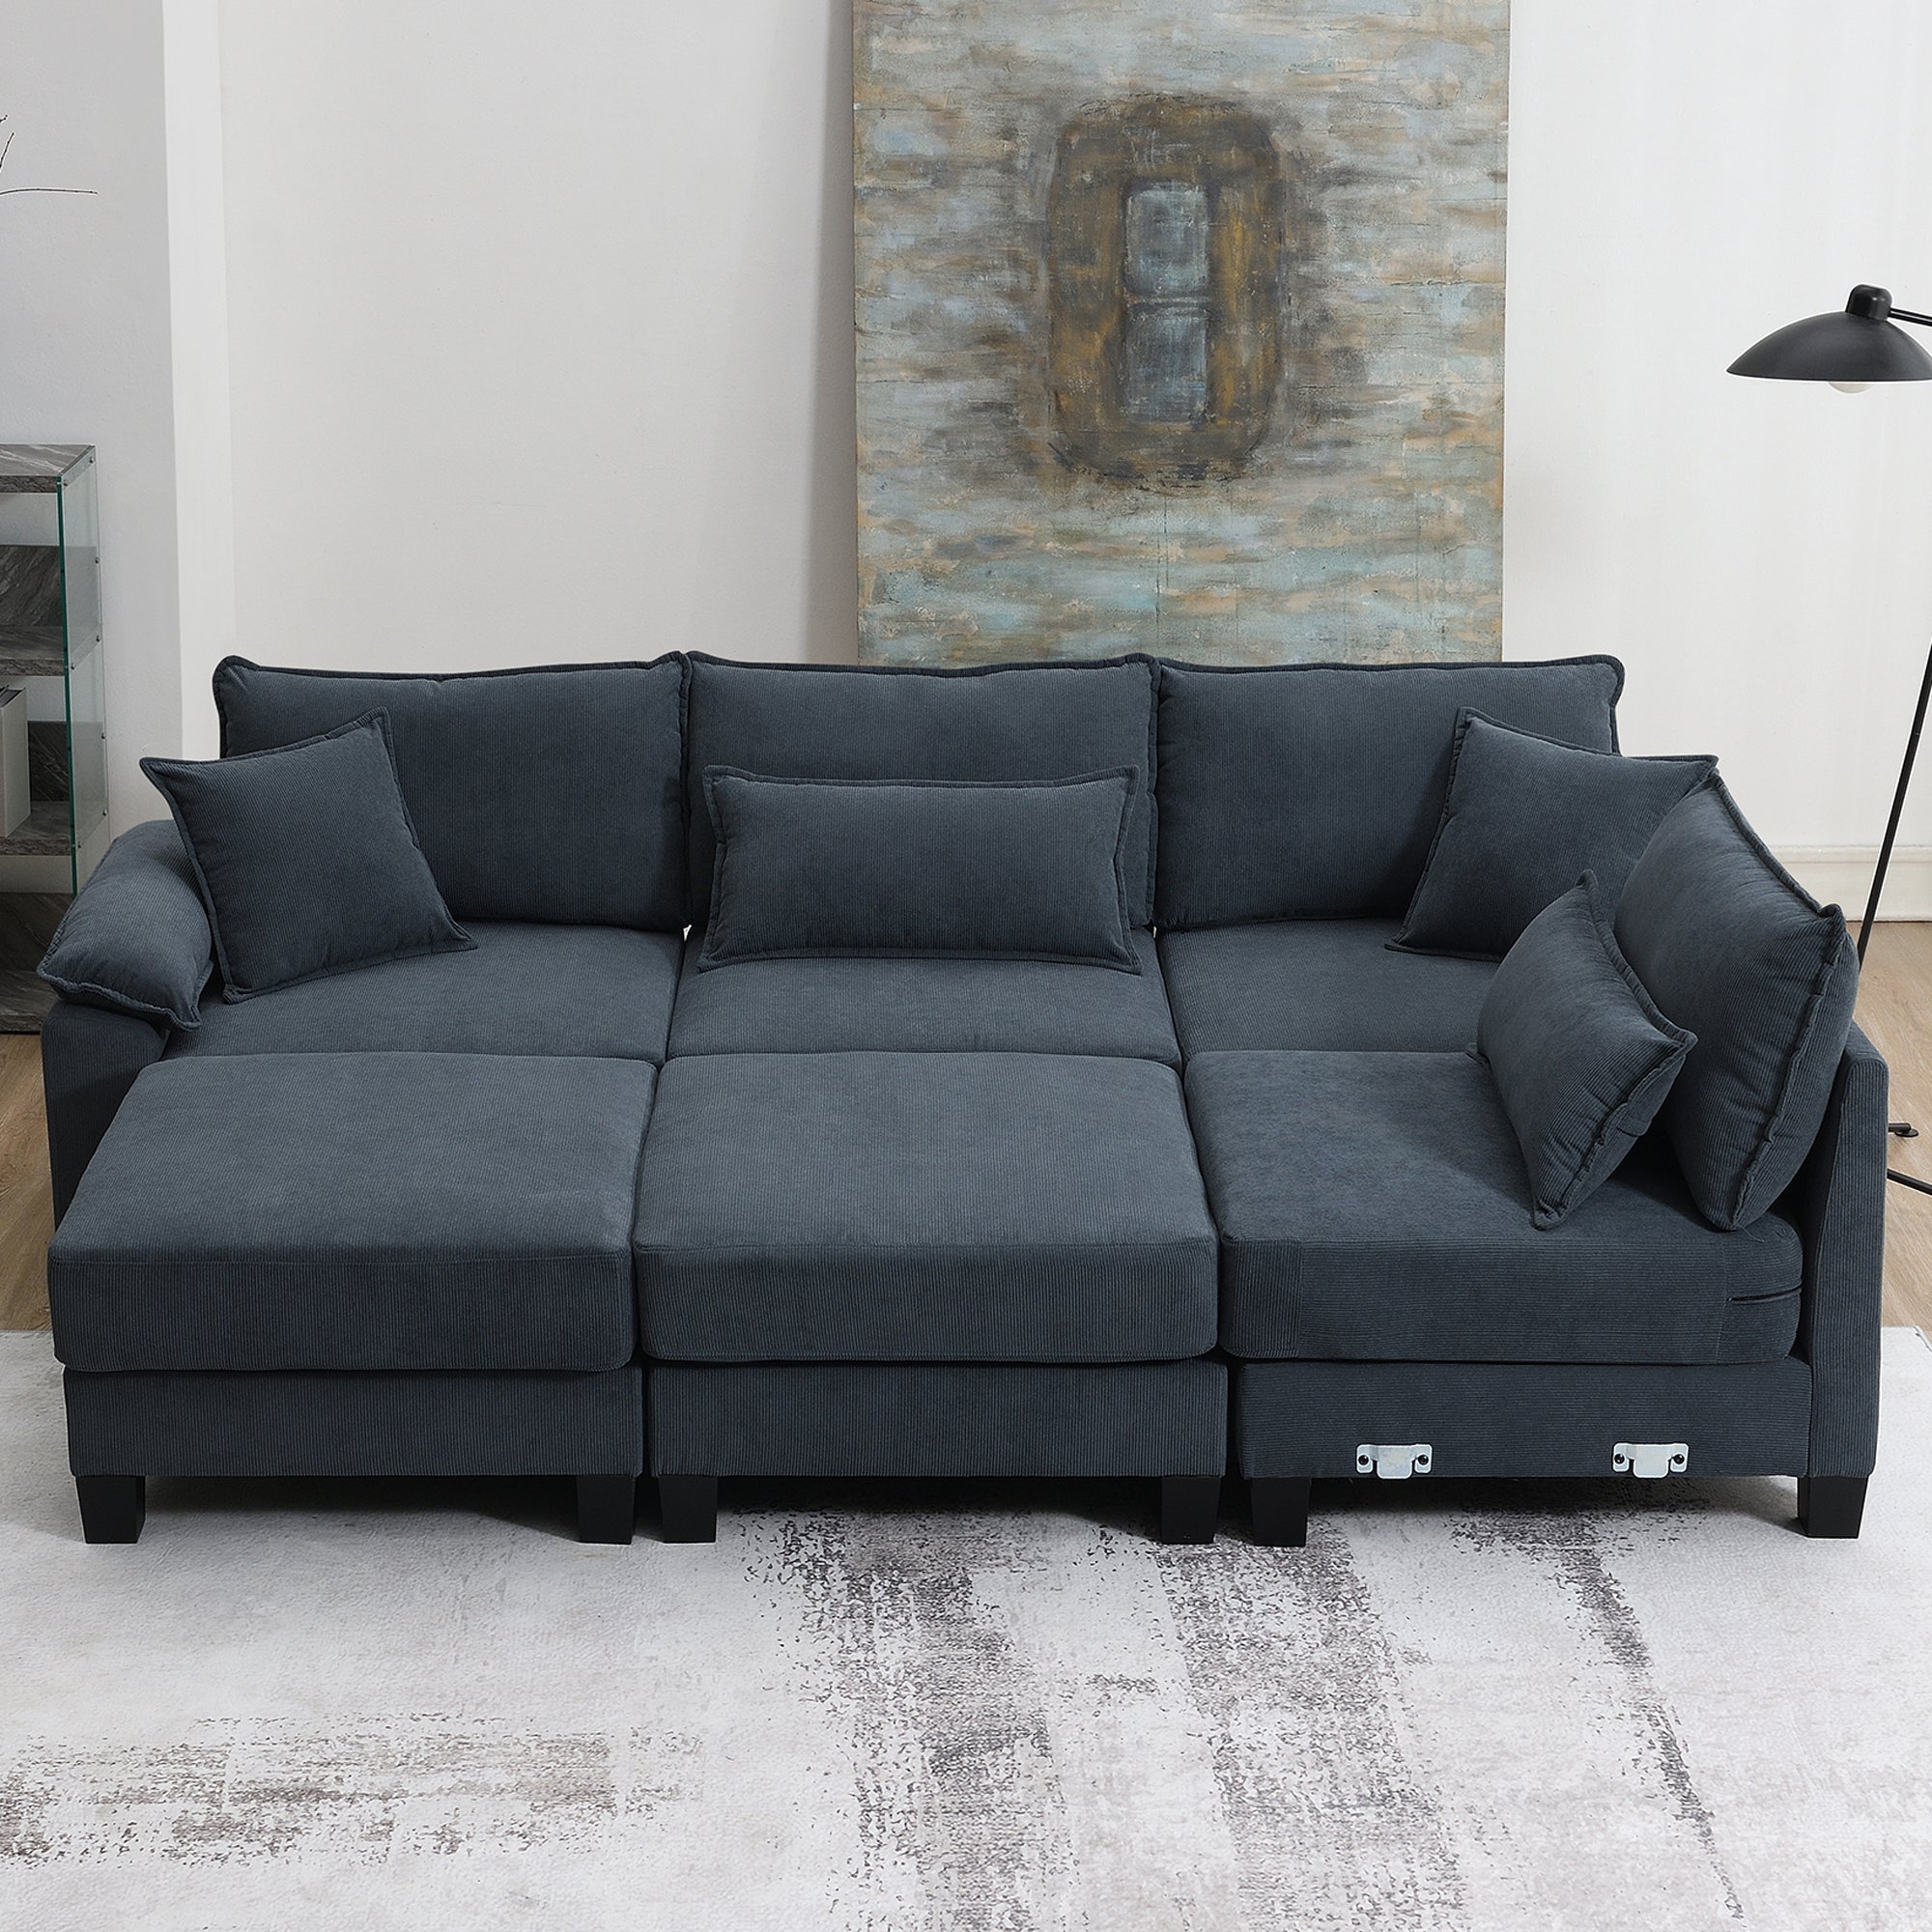 133*65" Corduroy Modular Sectional Sofa - U Shaped Couch with Armrest Bags - 6 Seat Freely Combinable Sofa Bed - Comfortable and Spacious Indoor Furniture for Living Room - Available in 2 Colors